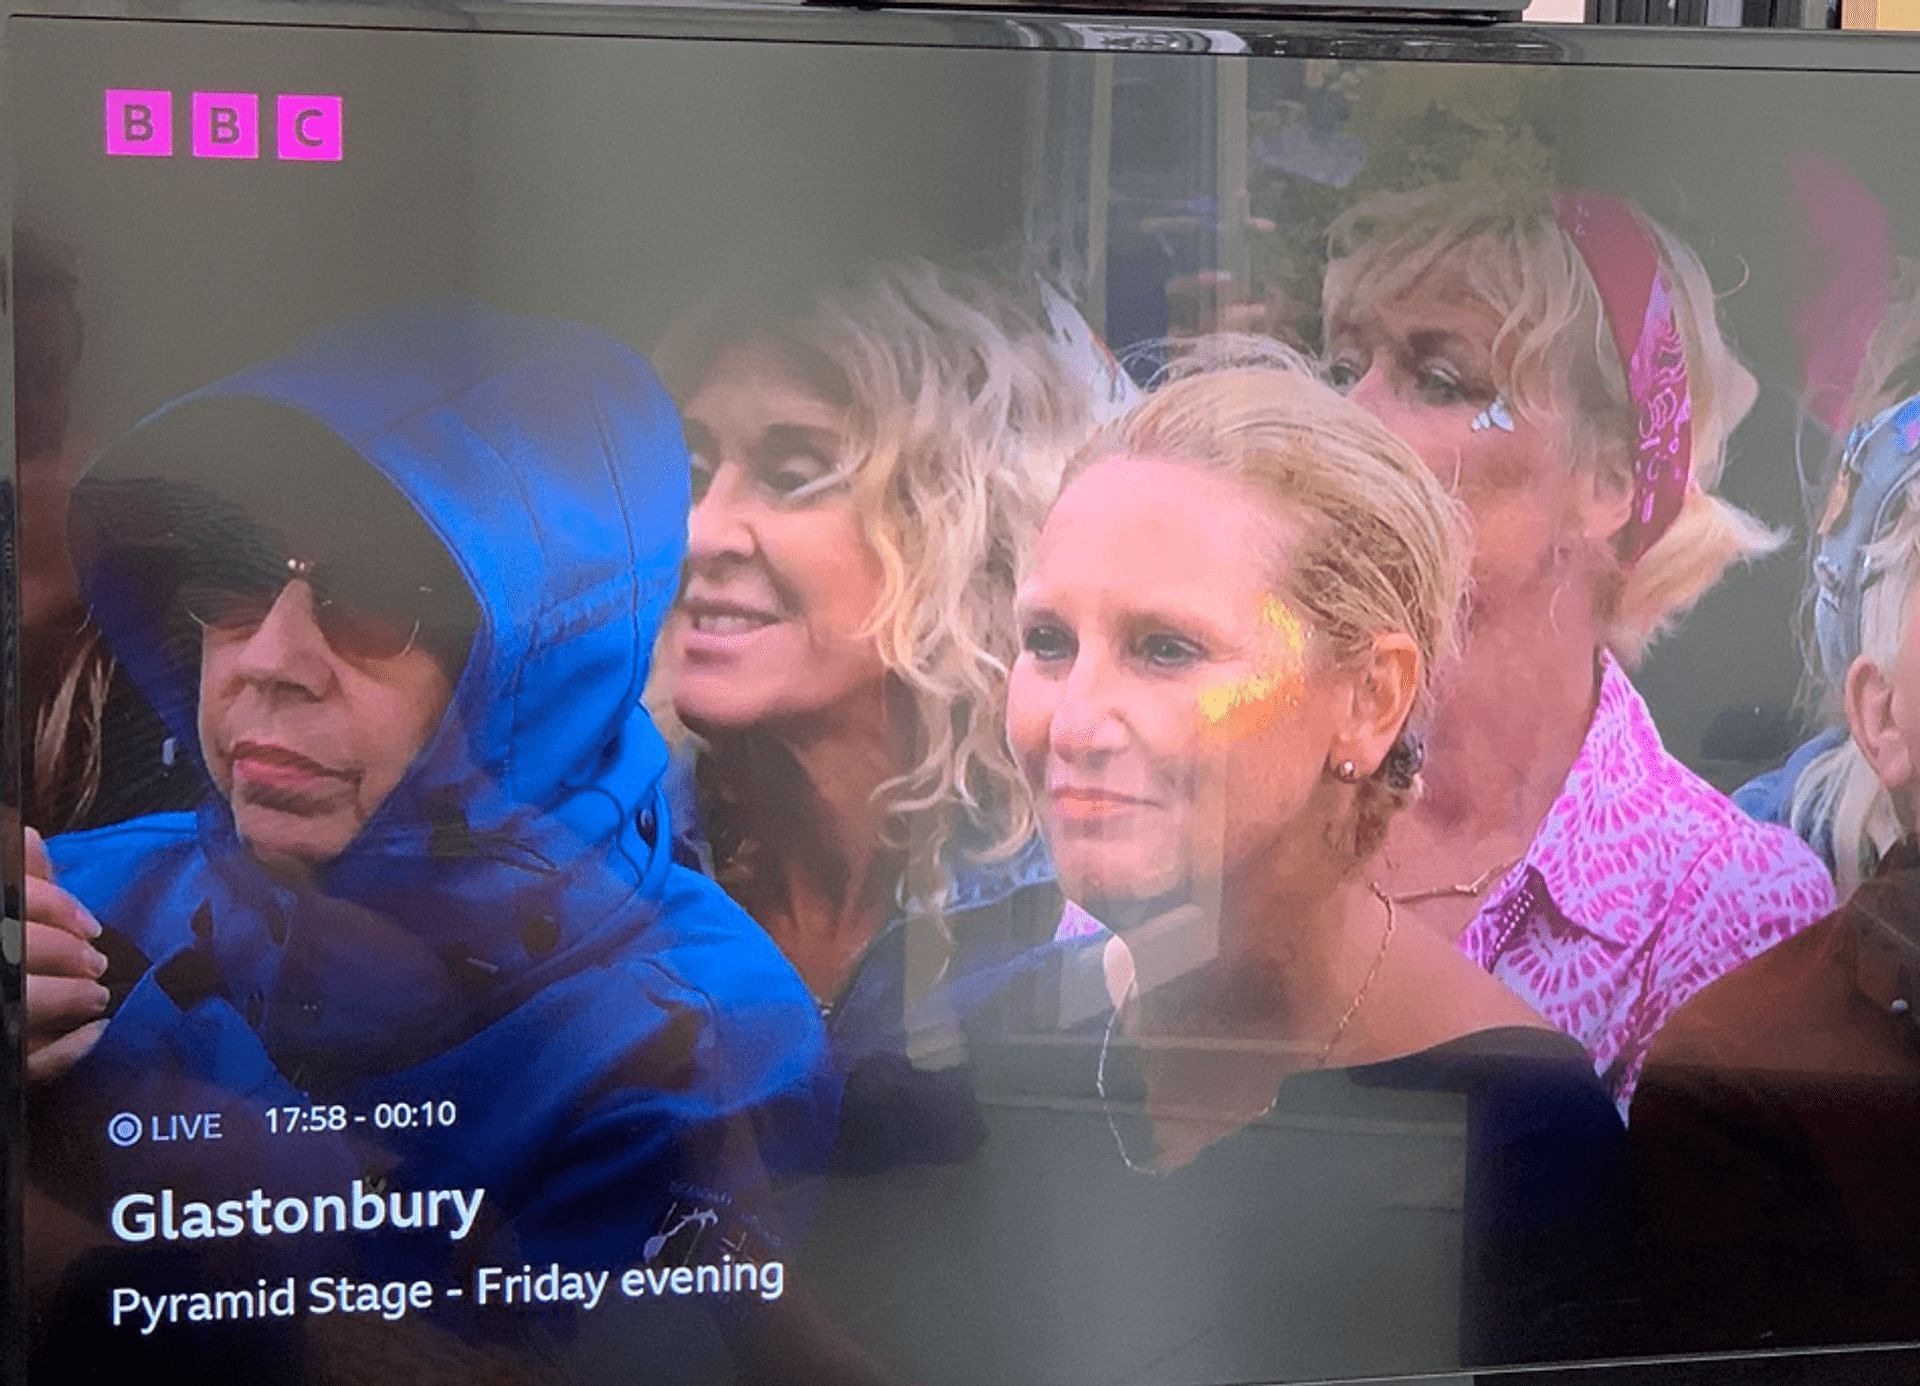 Fan tweeted about spotting Queen&#039;s look-alike at the Glastonbury Festival; goes viral (Image via @finn__sharky/Twitter)